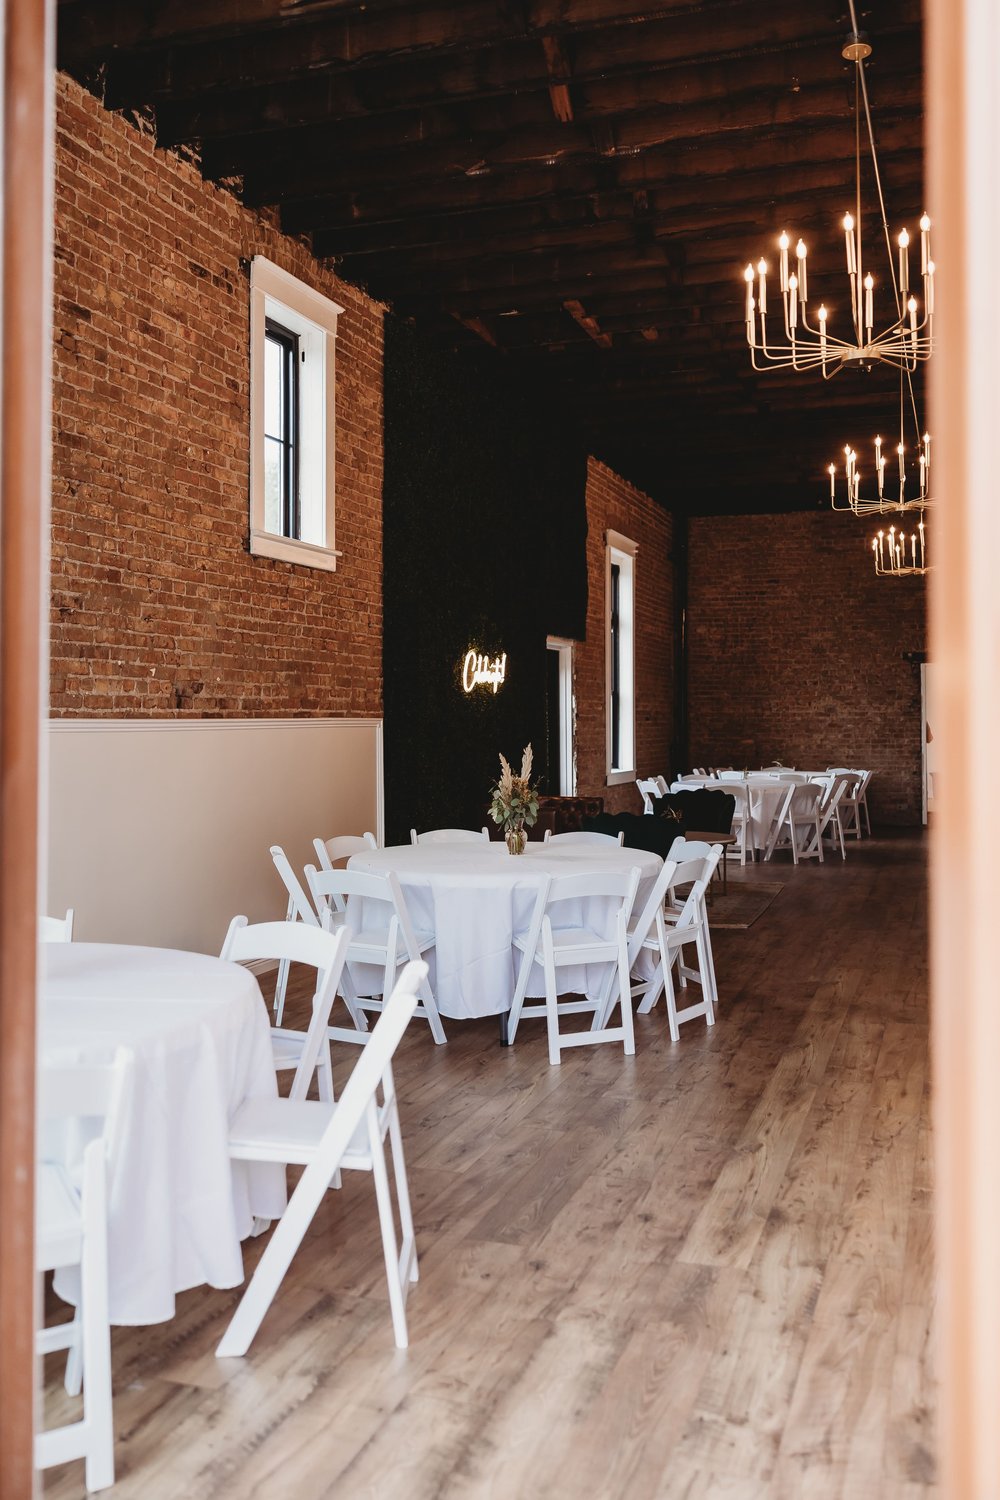  from the doorframe we see three round tables with white tablecloths and white wooden folding chairs  